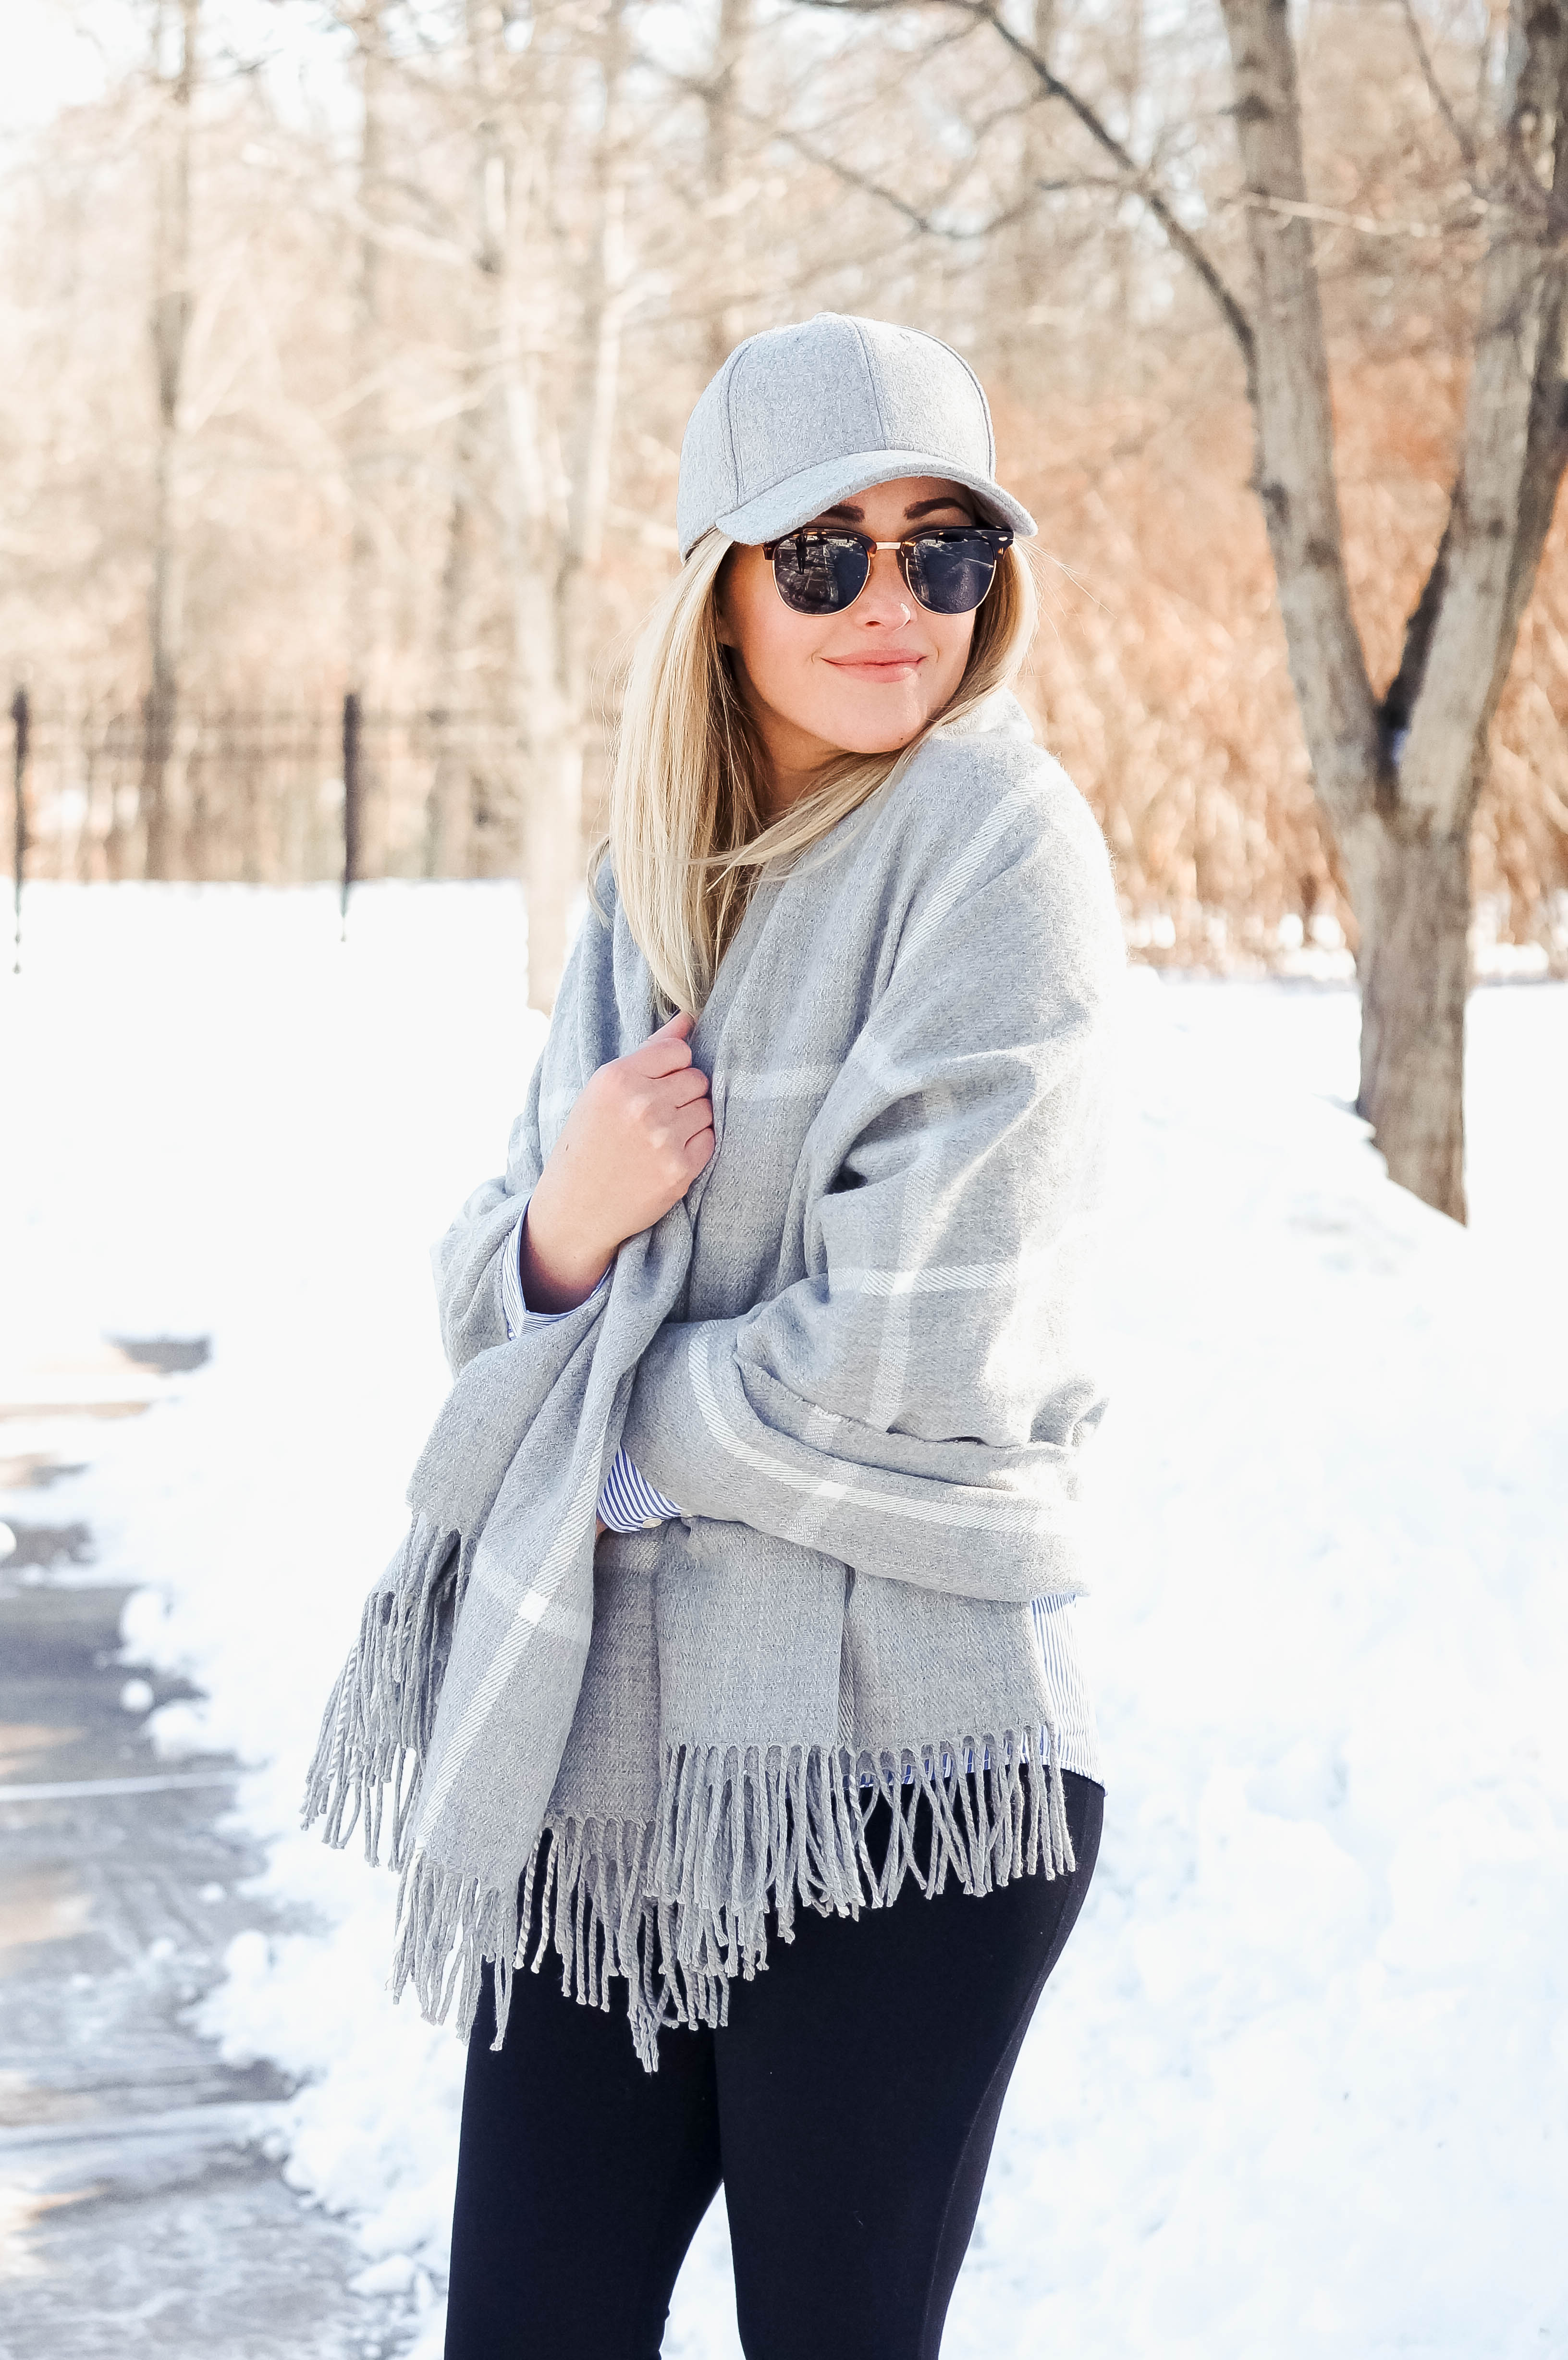 Styling Blue & White Stripes For Winter